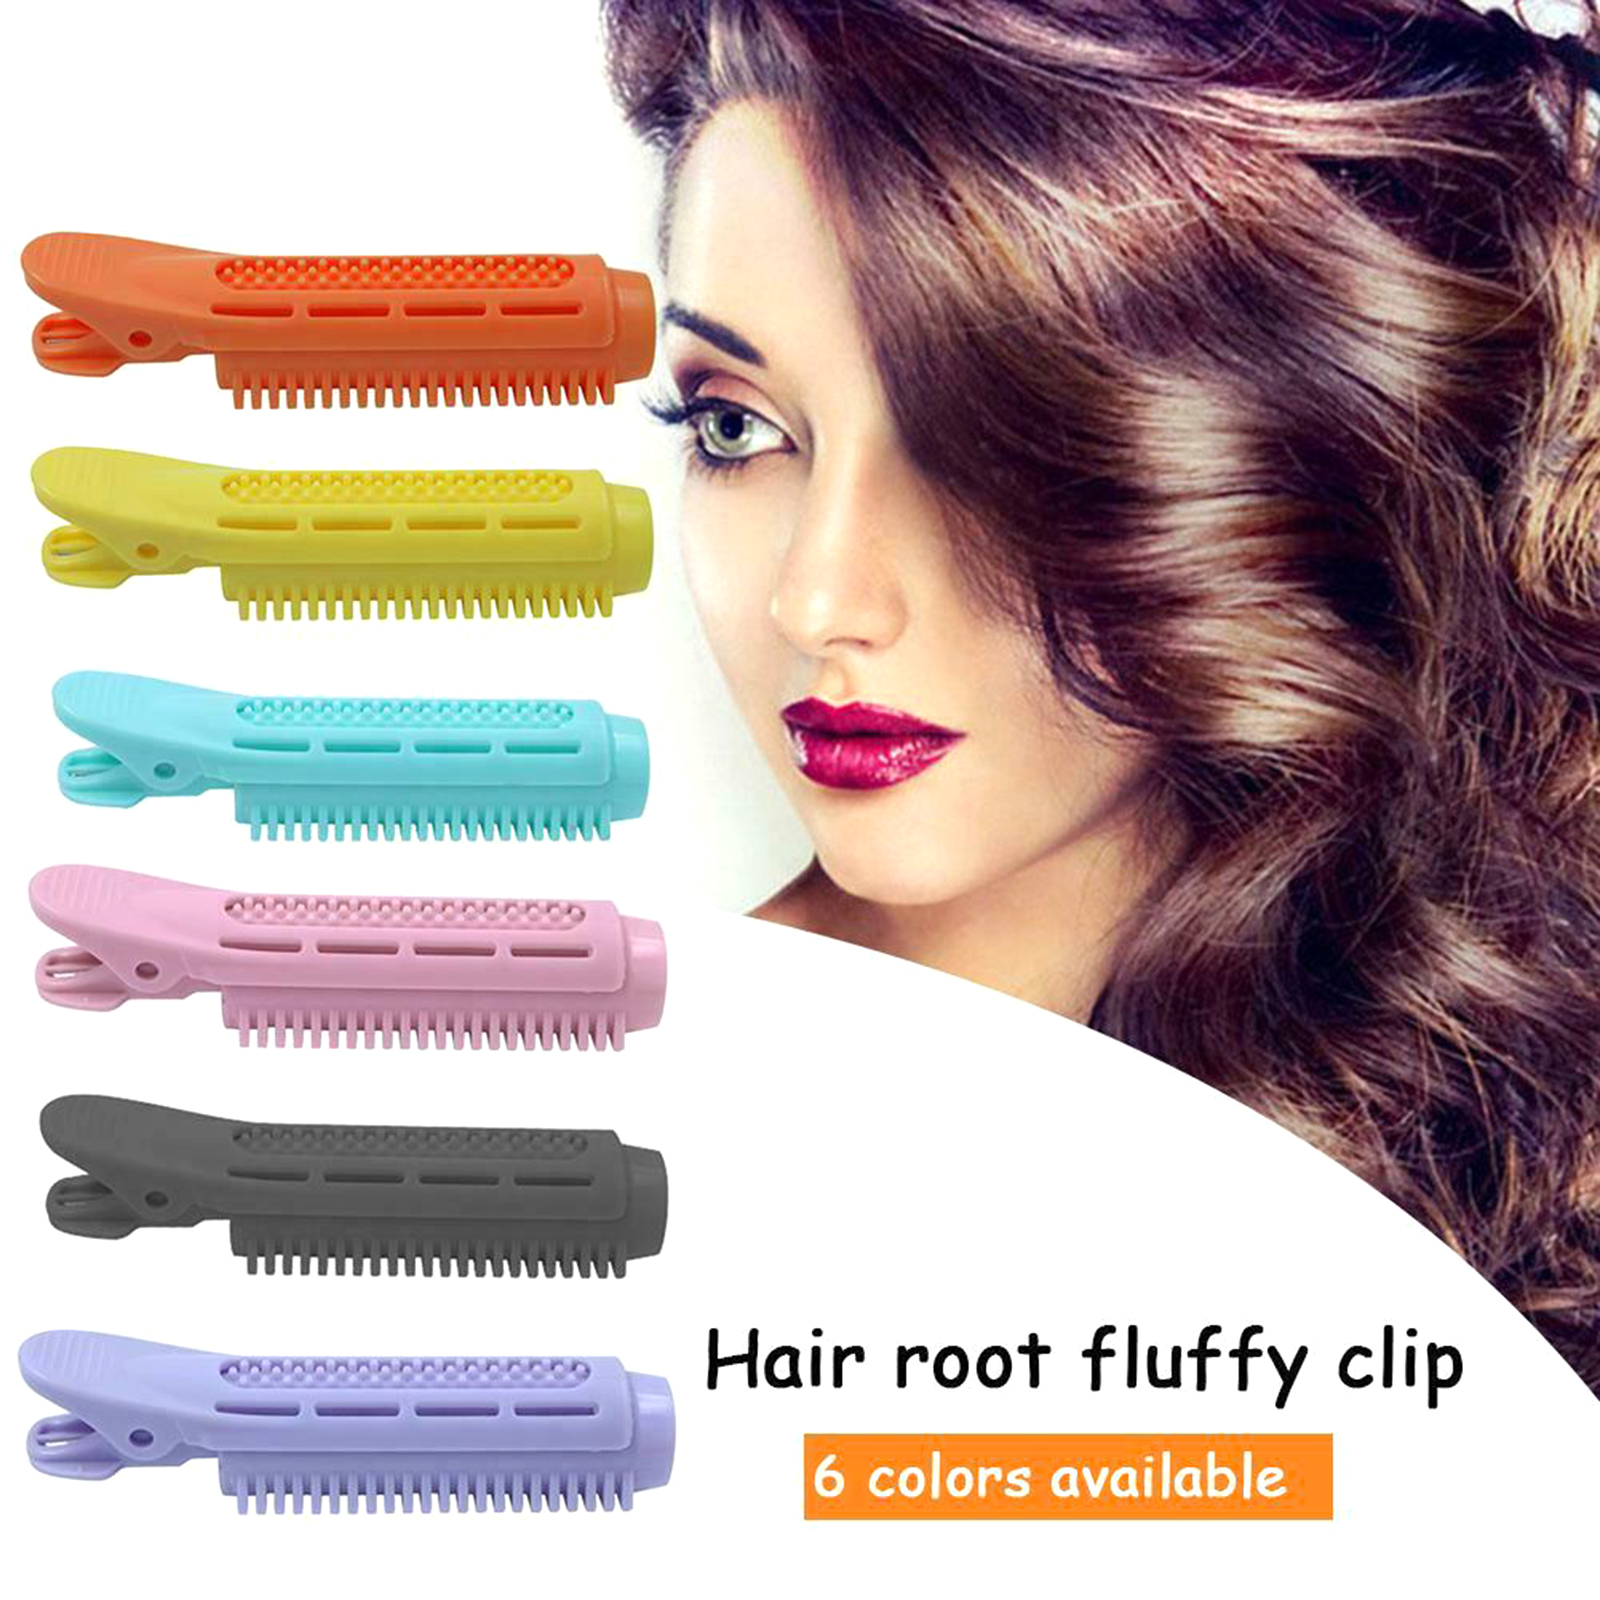 Aibecy 6 Pcs Styling Curling Clip Self Grip Root Volume Fluffy Hair Curler Clip Perm for Hair Styling - image 5 of 7